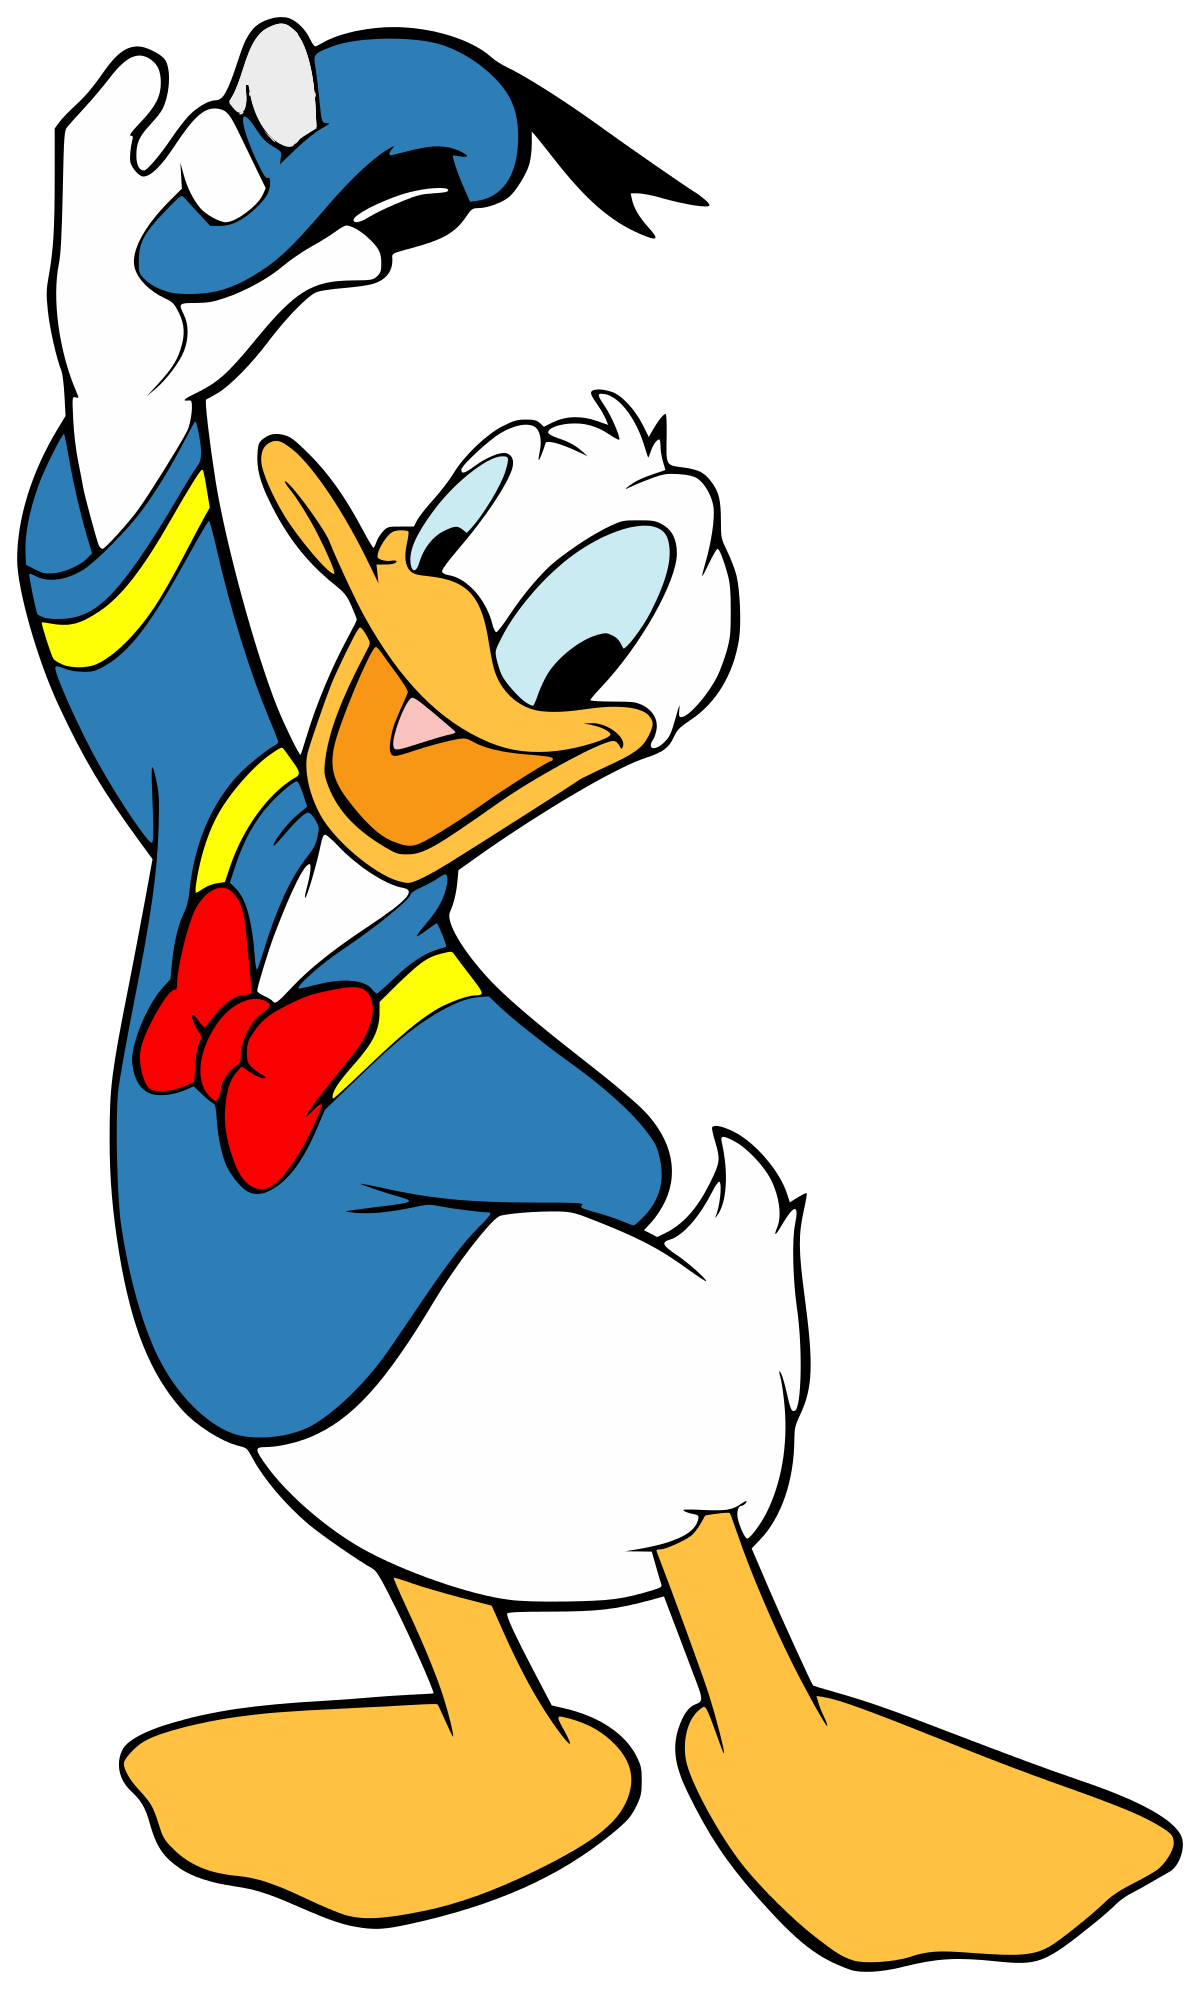 Donald png images free. Home clipart duck